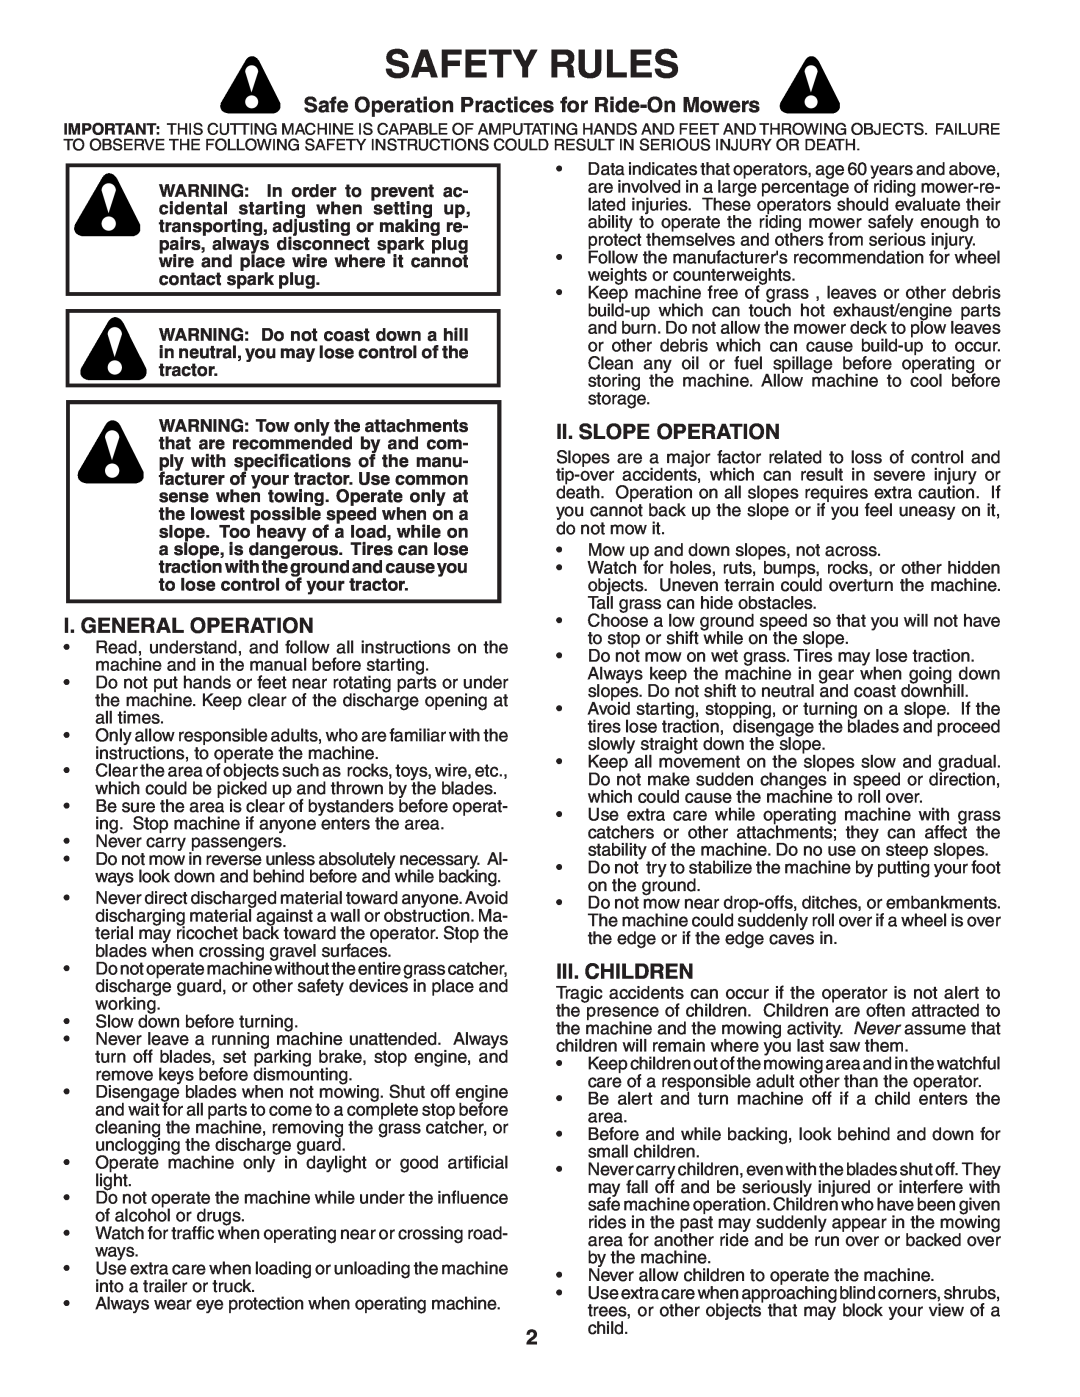 Poulan 954 04 05-06 Safety Rules, Safe Operation Practices for Ride-On Mowers, I. General Operation, Ii. Slope Operation 